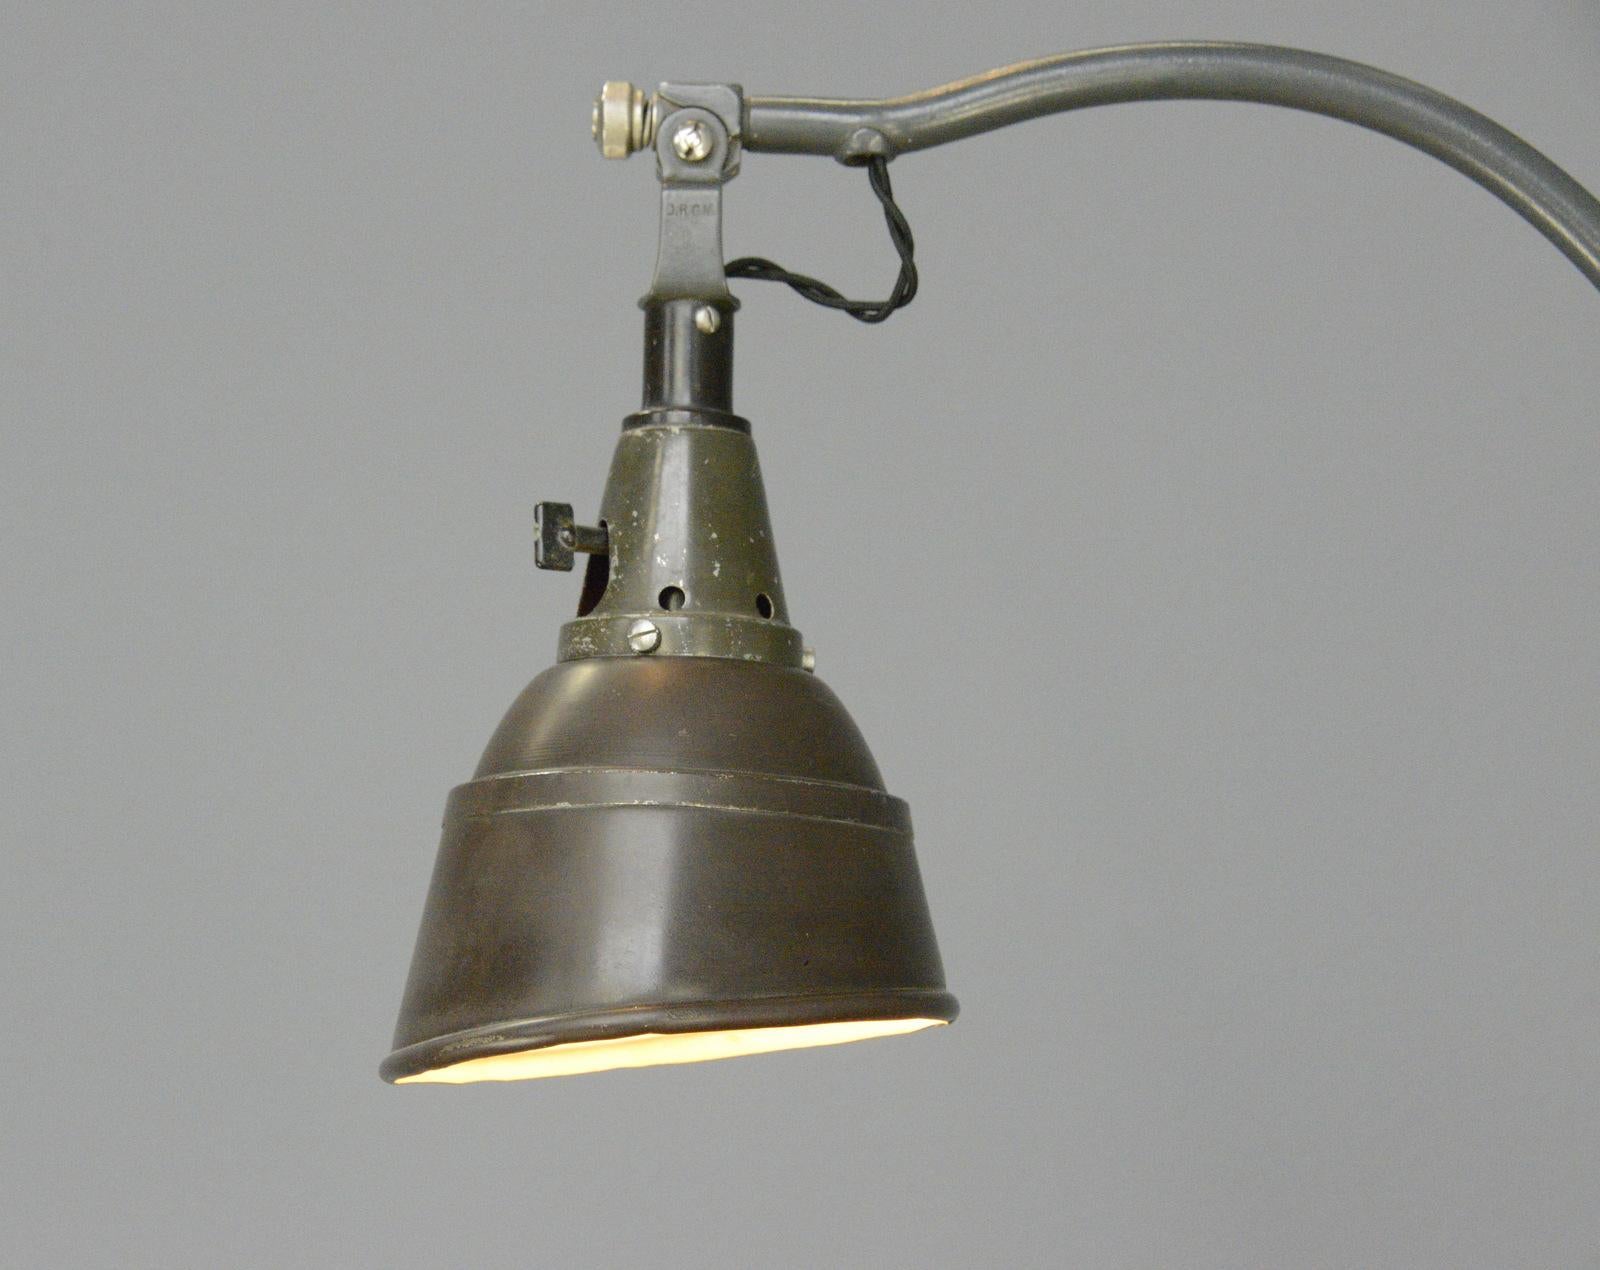 Typ 113 Peitsche Table Lamp by Curt Fischer for Midgard circa 1940s For Sale 2